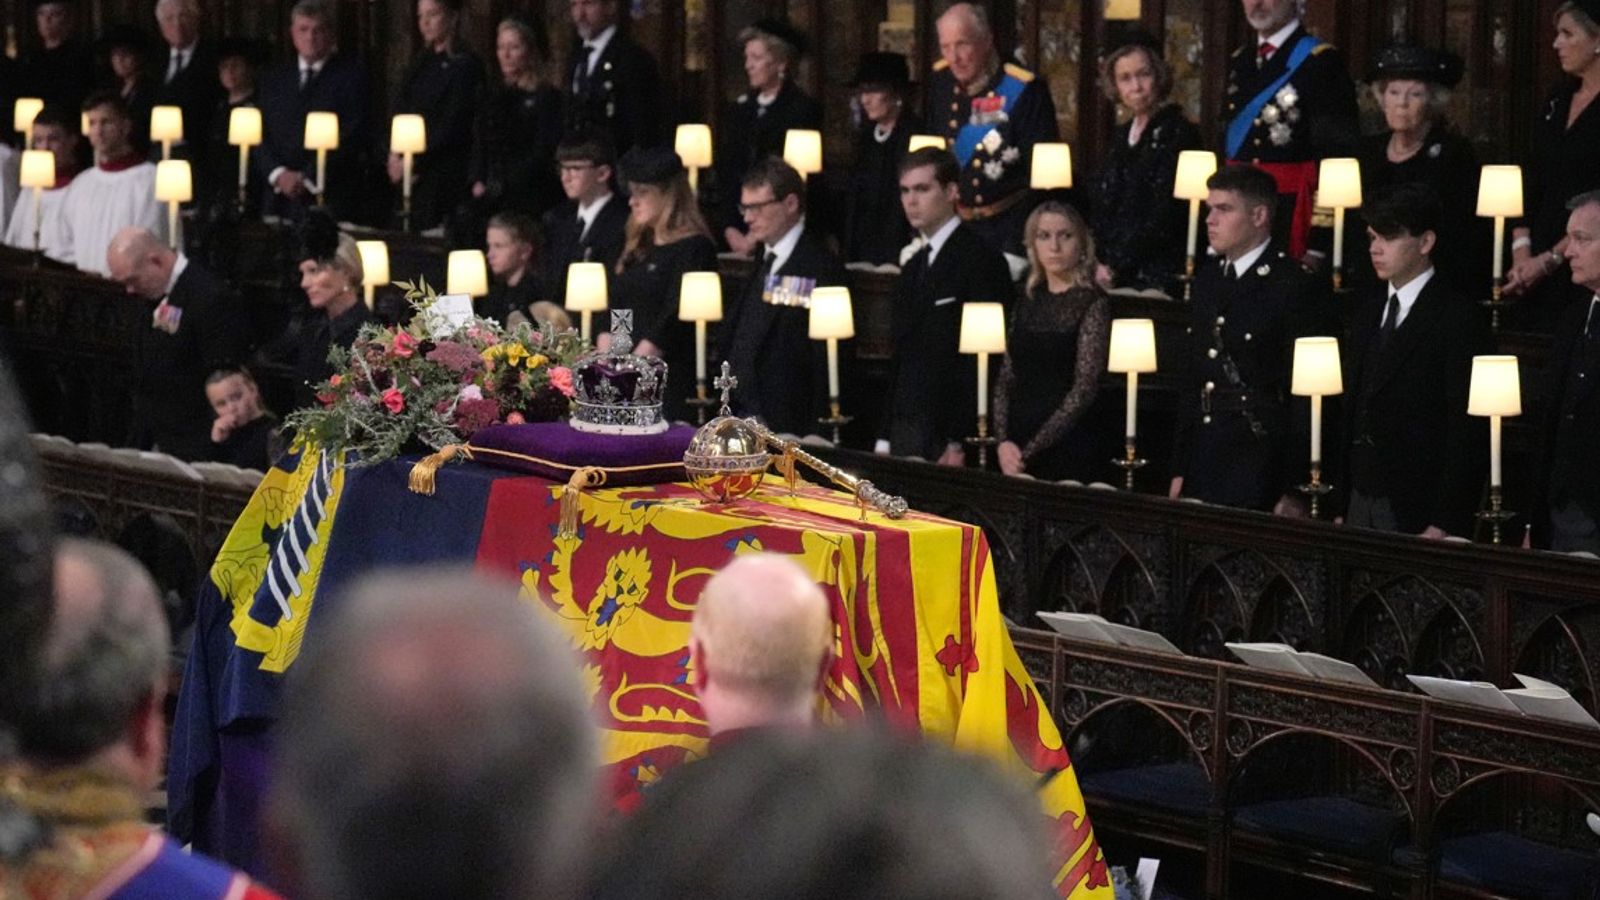 Cost of Queen Elizabeth II's funeral and lying in state revealed